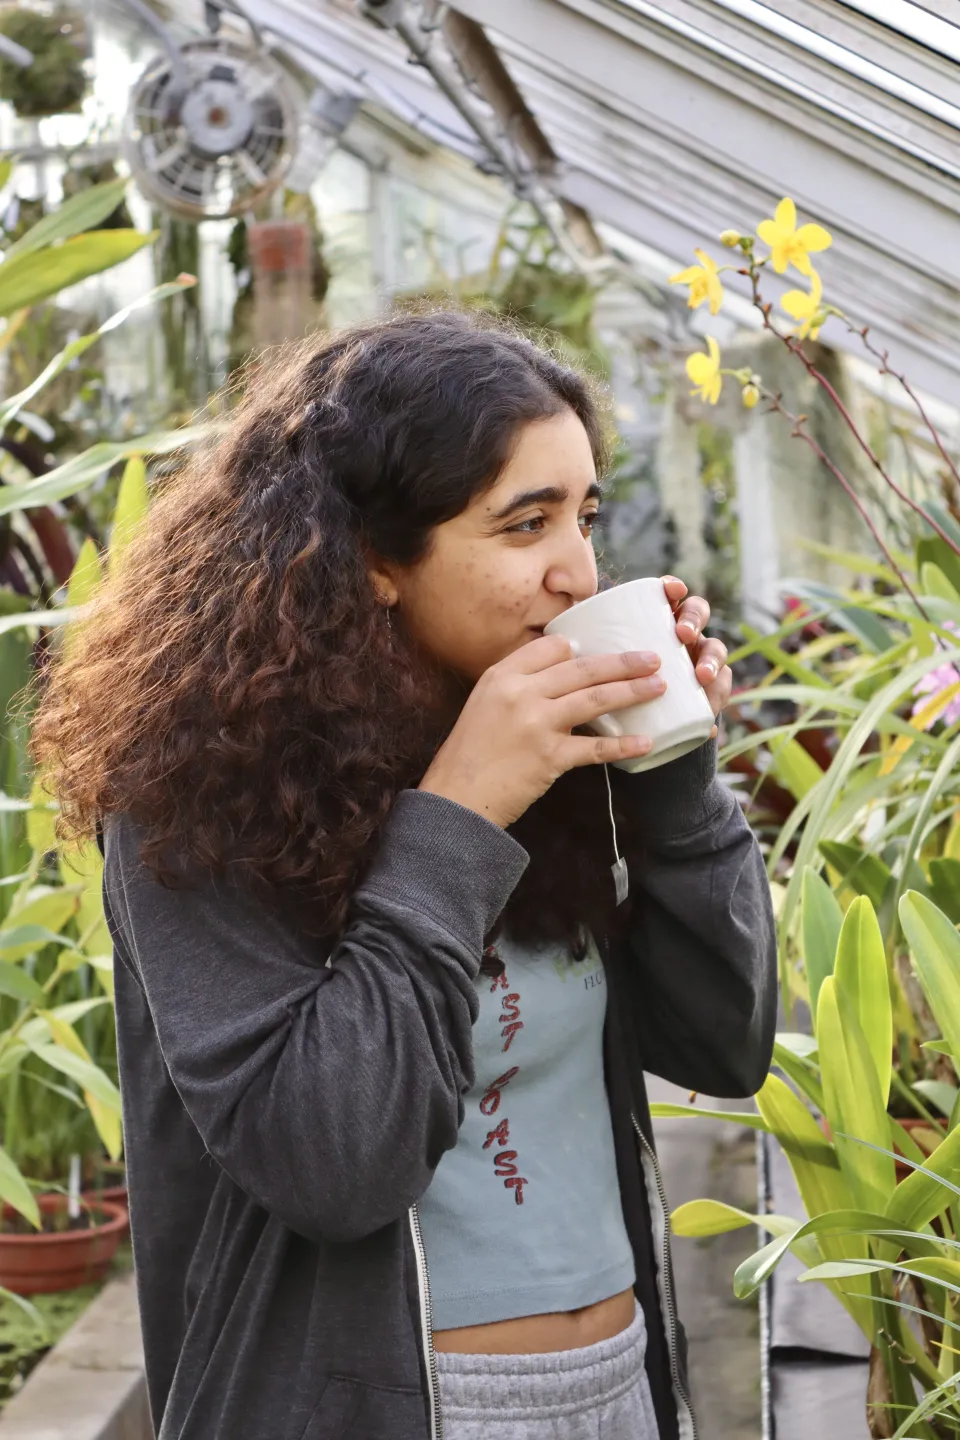 A Smith student sips tea from a white mug in Lyman Conservatory